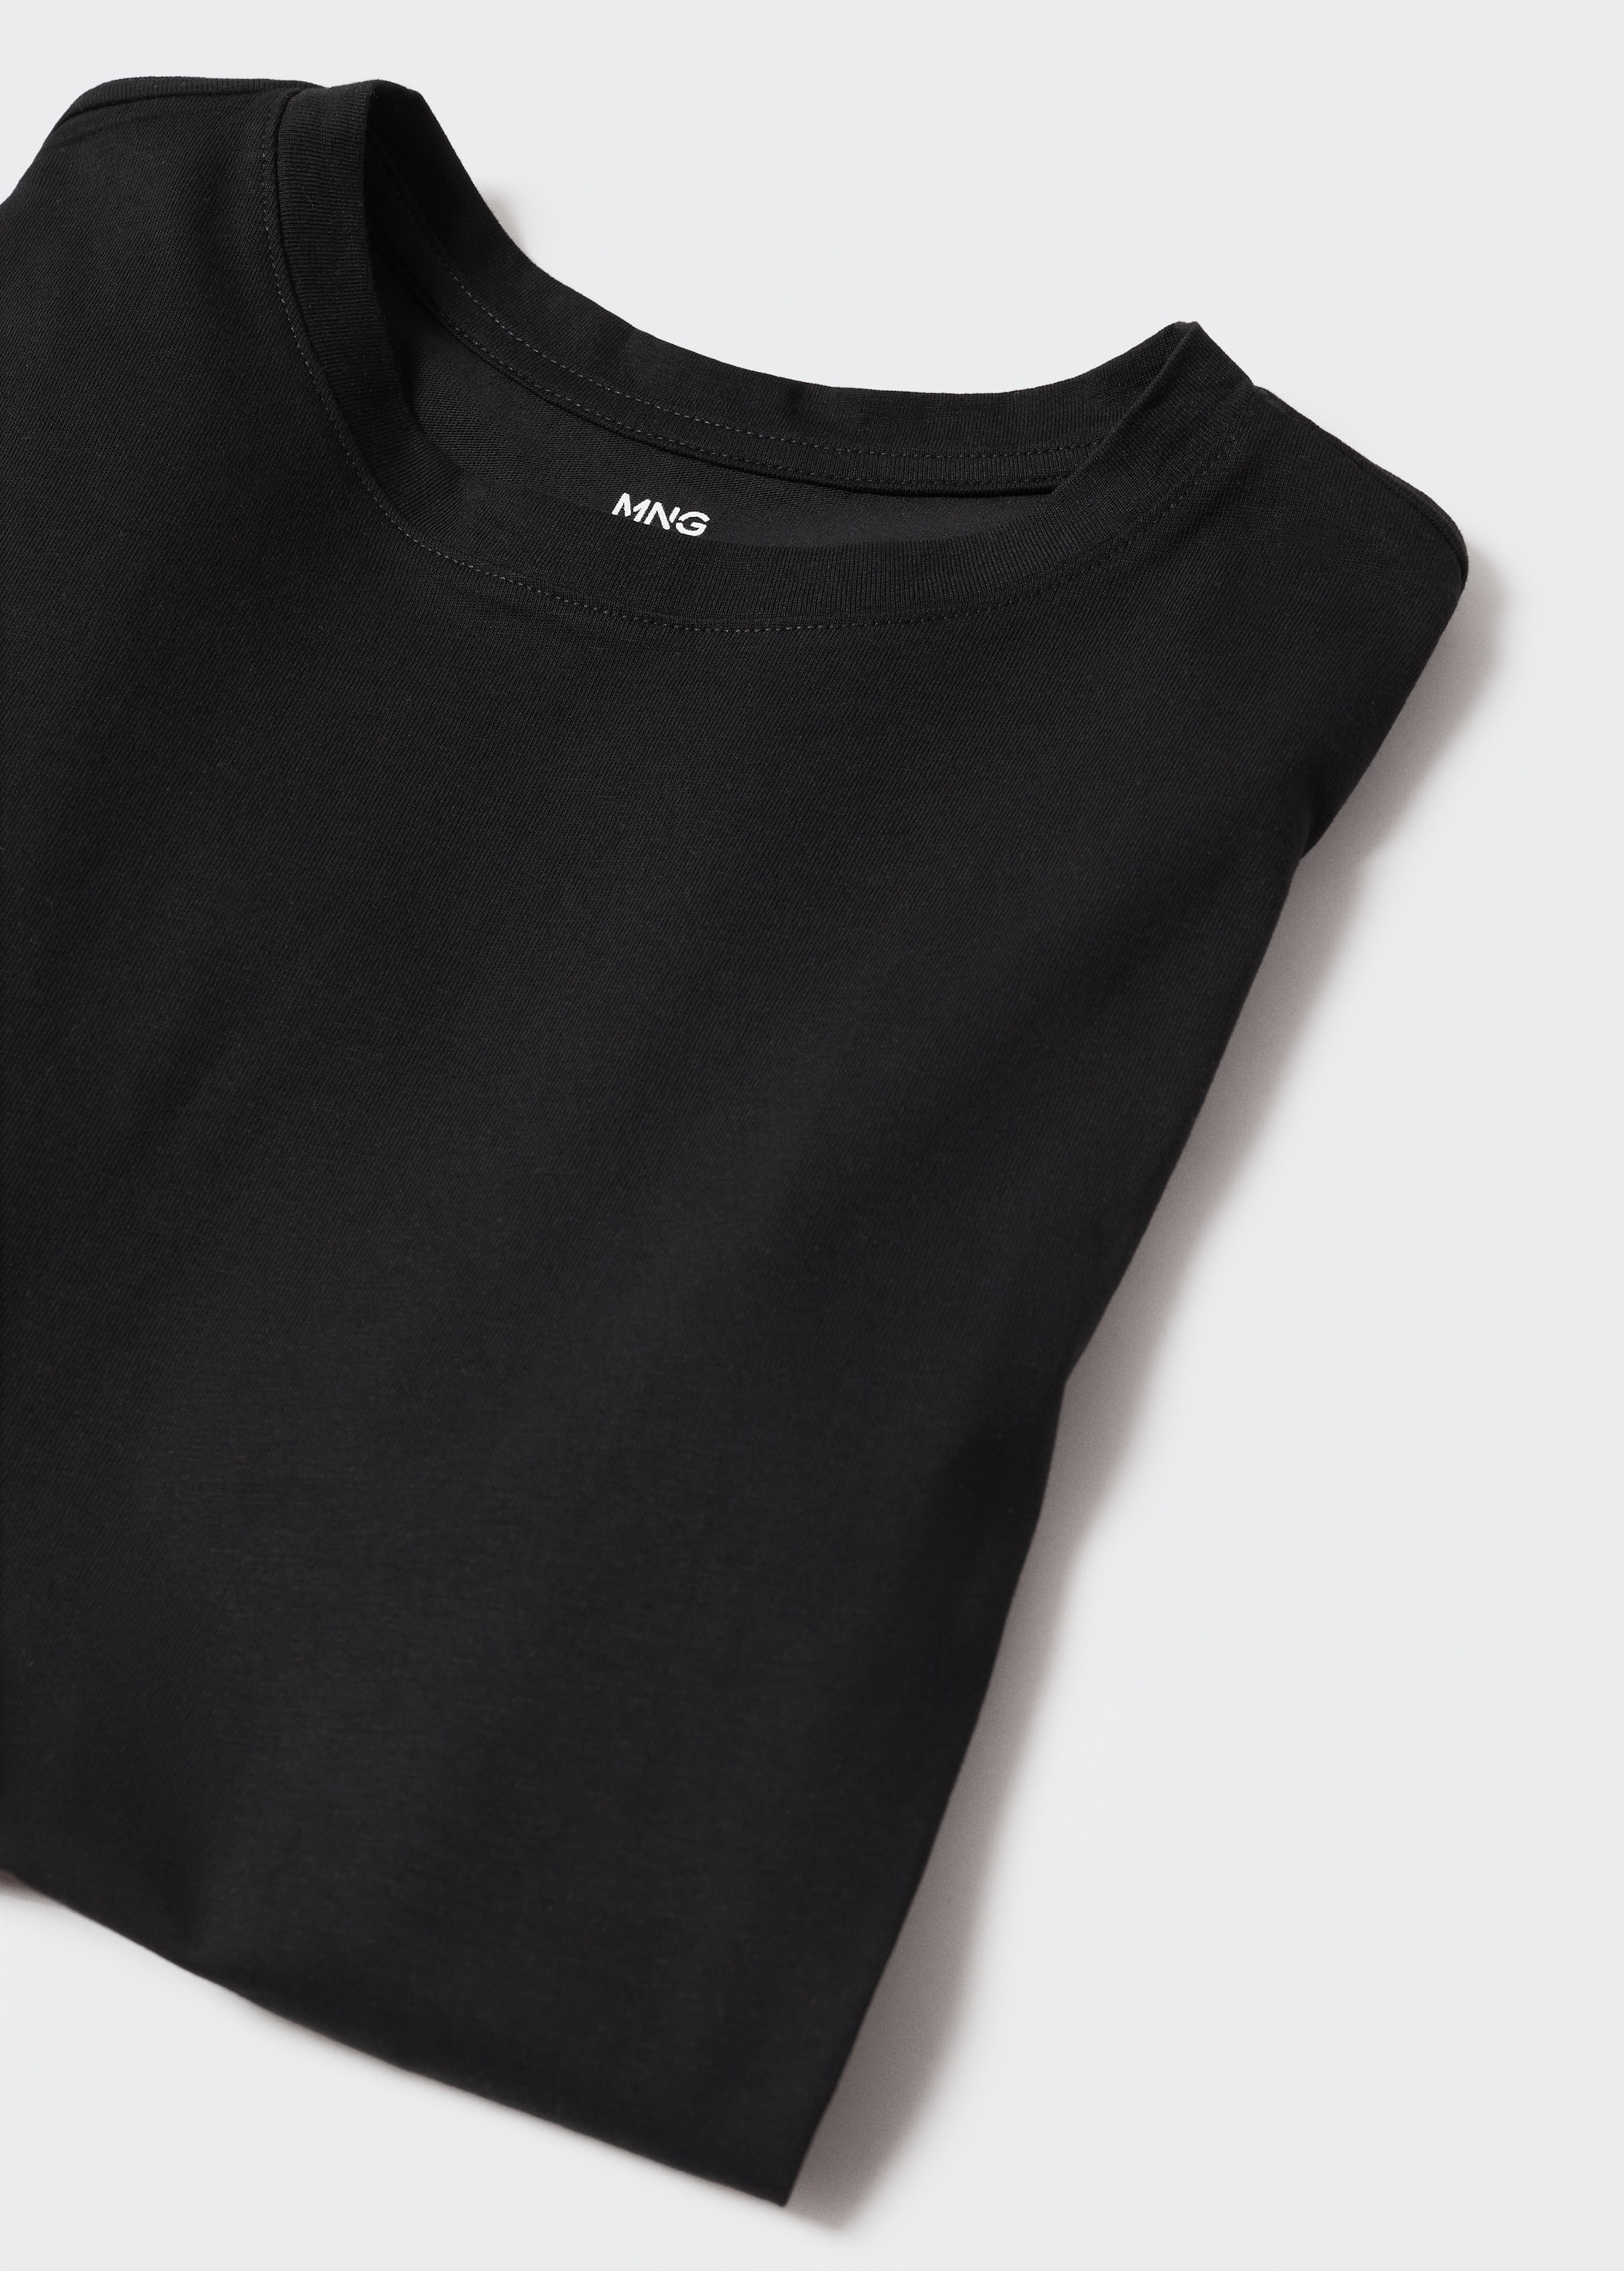 100% cotton T-shirt - Details of the article 8